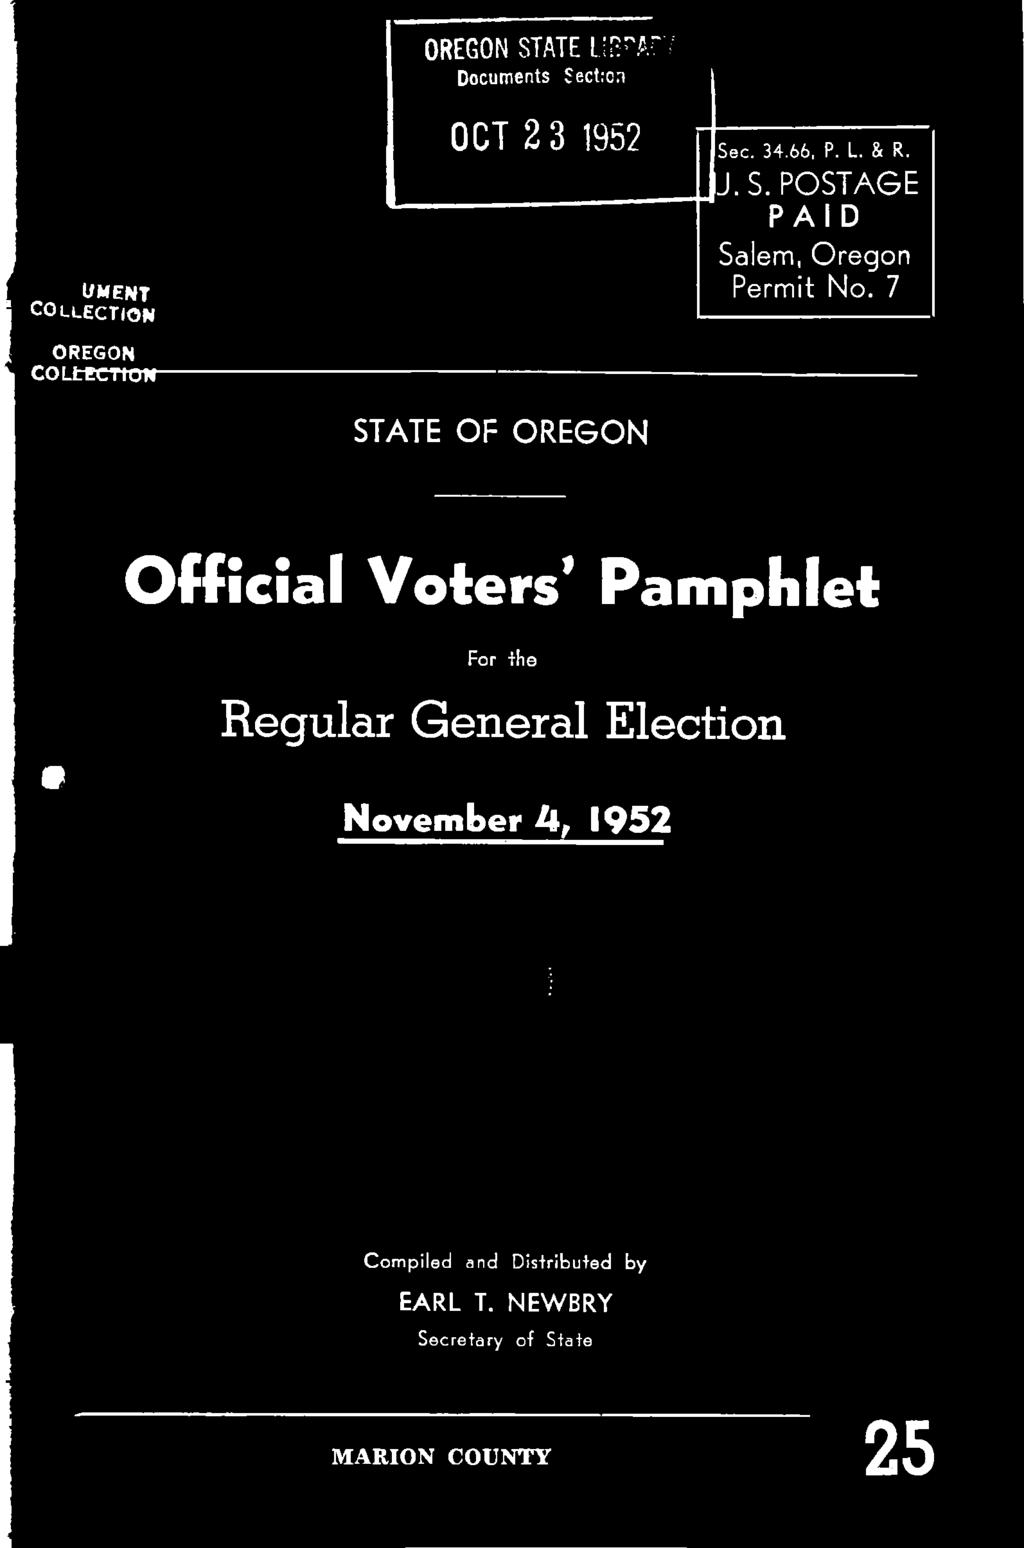 No. 7 OREGON CO LLECTION STATE OF OREGON